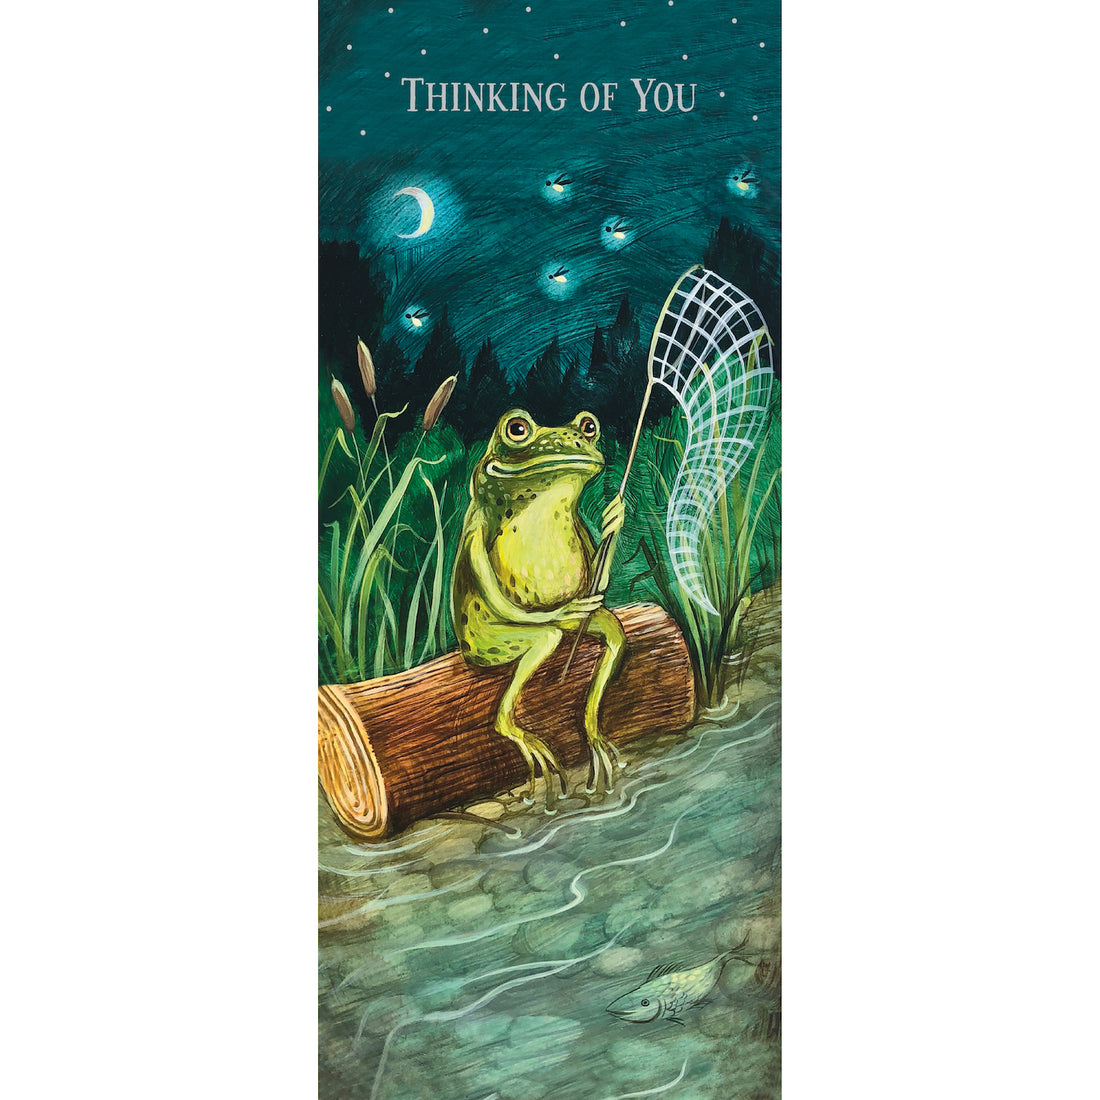 A whimsical illustration of a green frog sitting on a log next to a pond at night, holding a bug net as glowing fireflies drift above the frog&